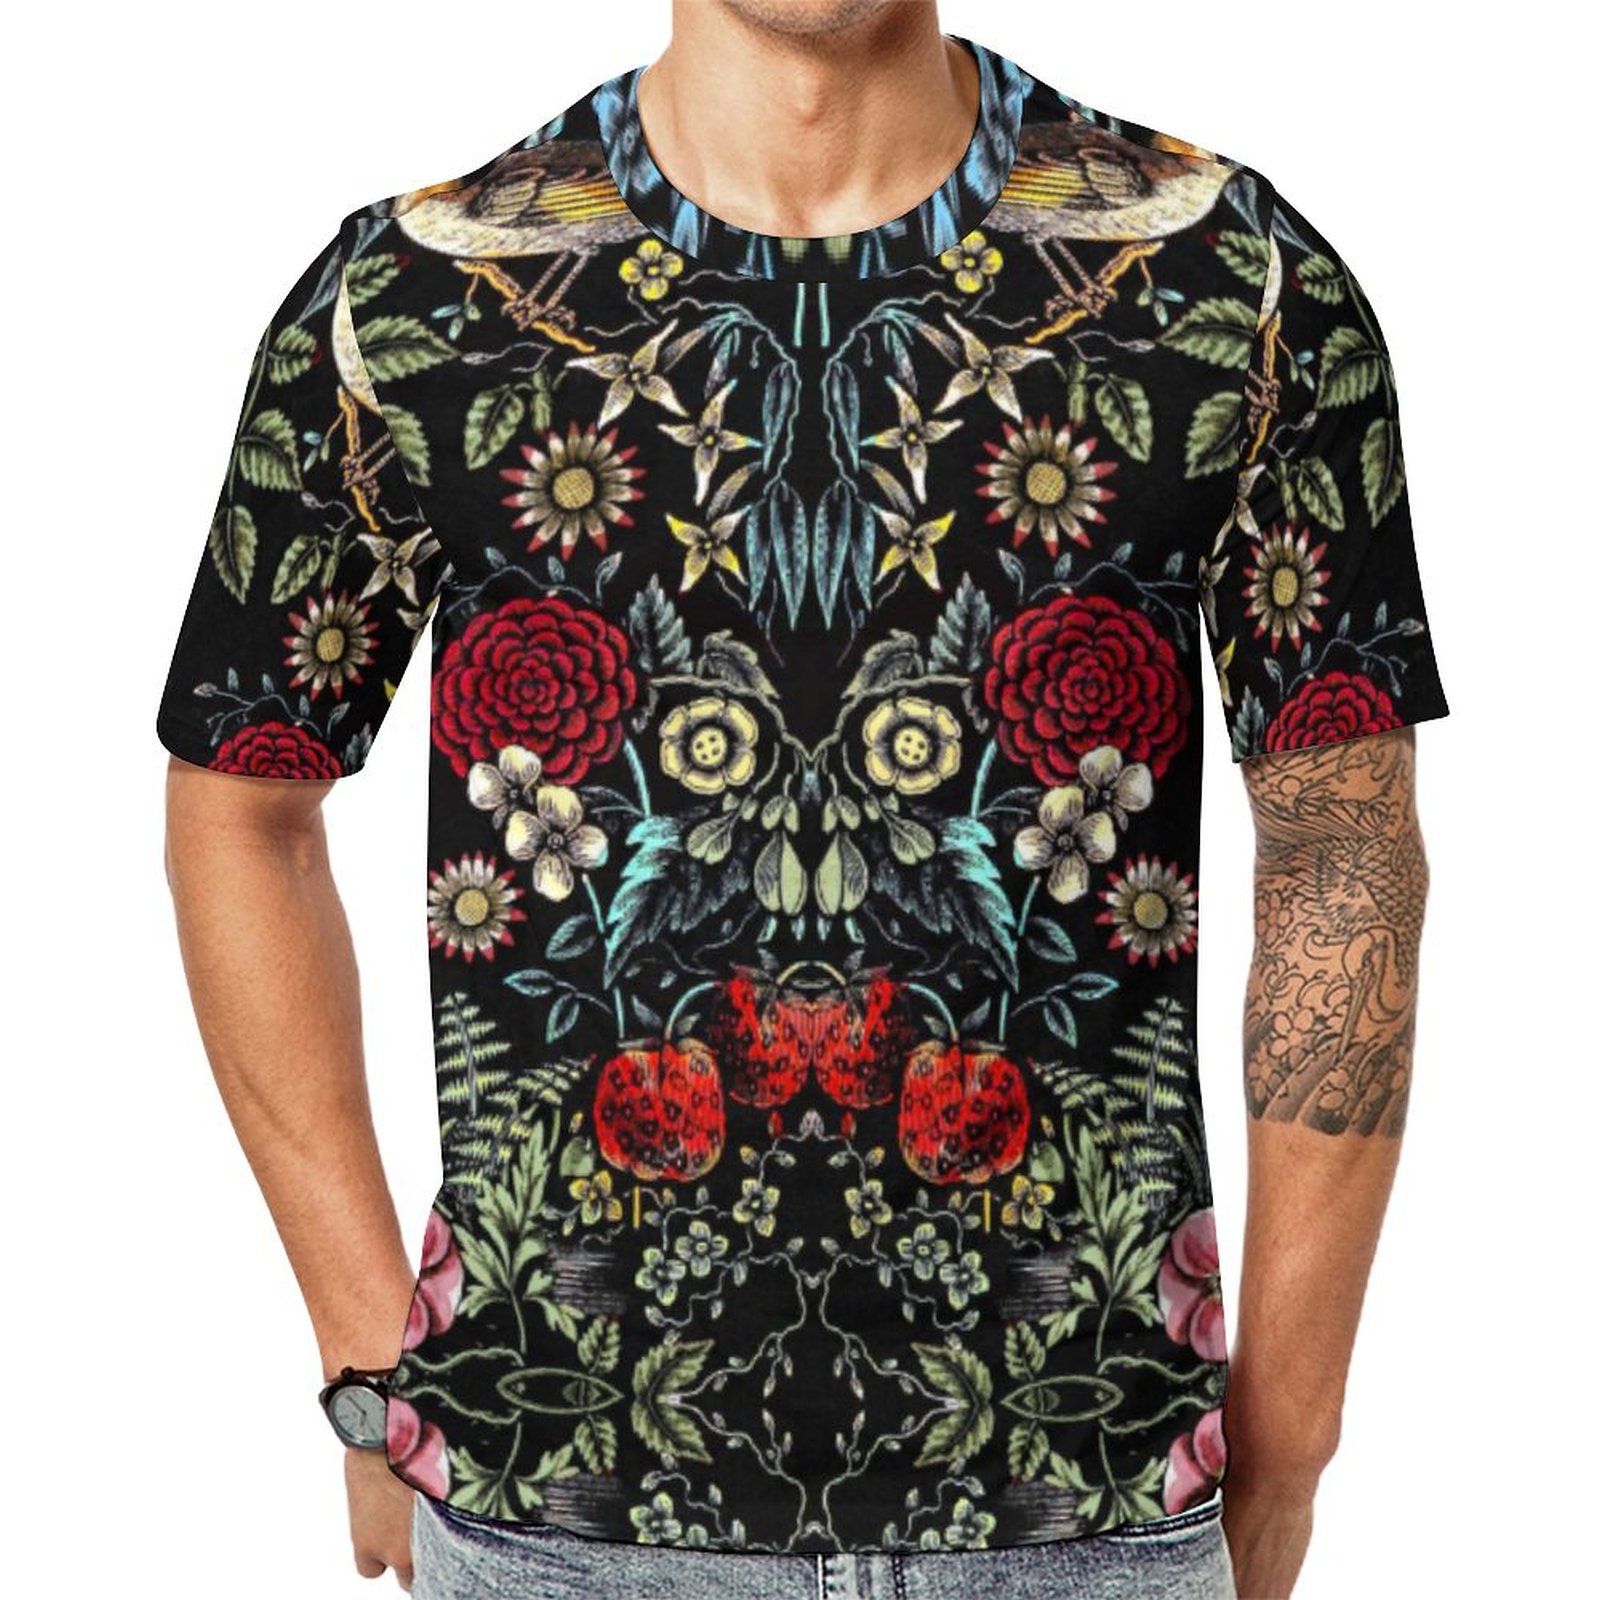 Black Red Vintage Flower Garden Short Sleeve Print Unisex Tshirt Summer Casual Tees for Men and Women Coolcoshirts